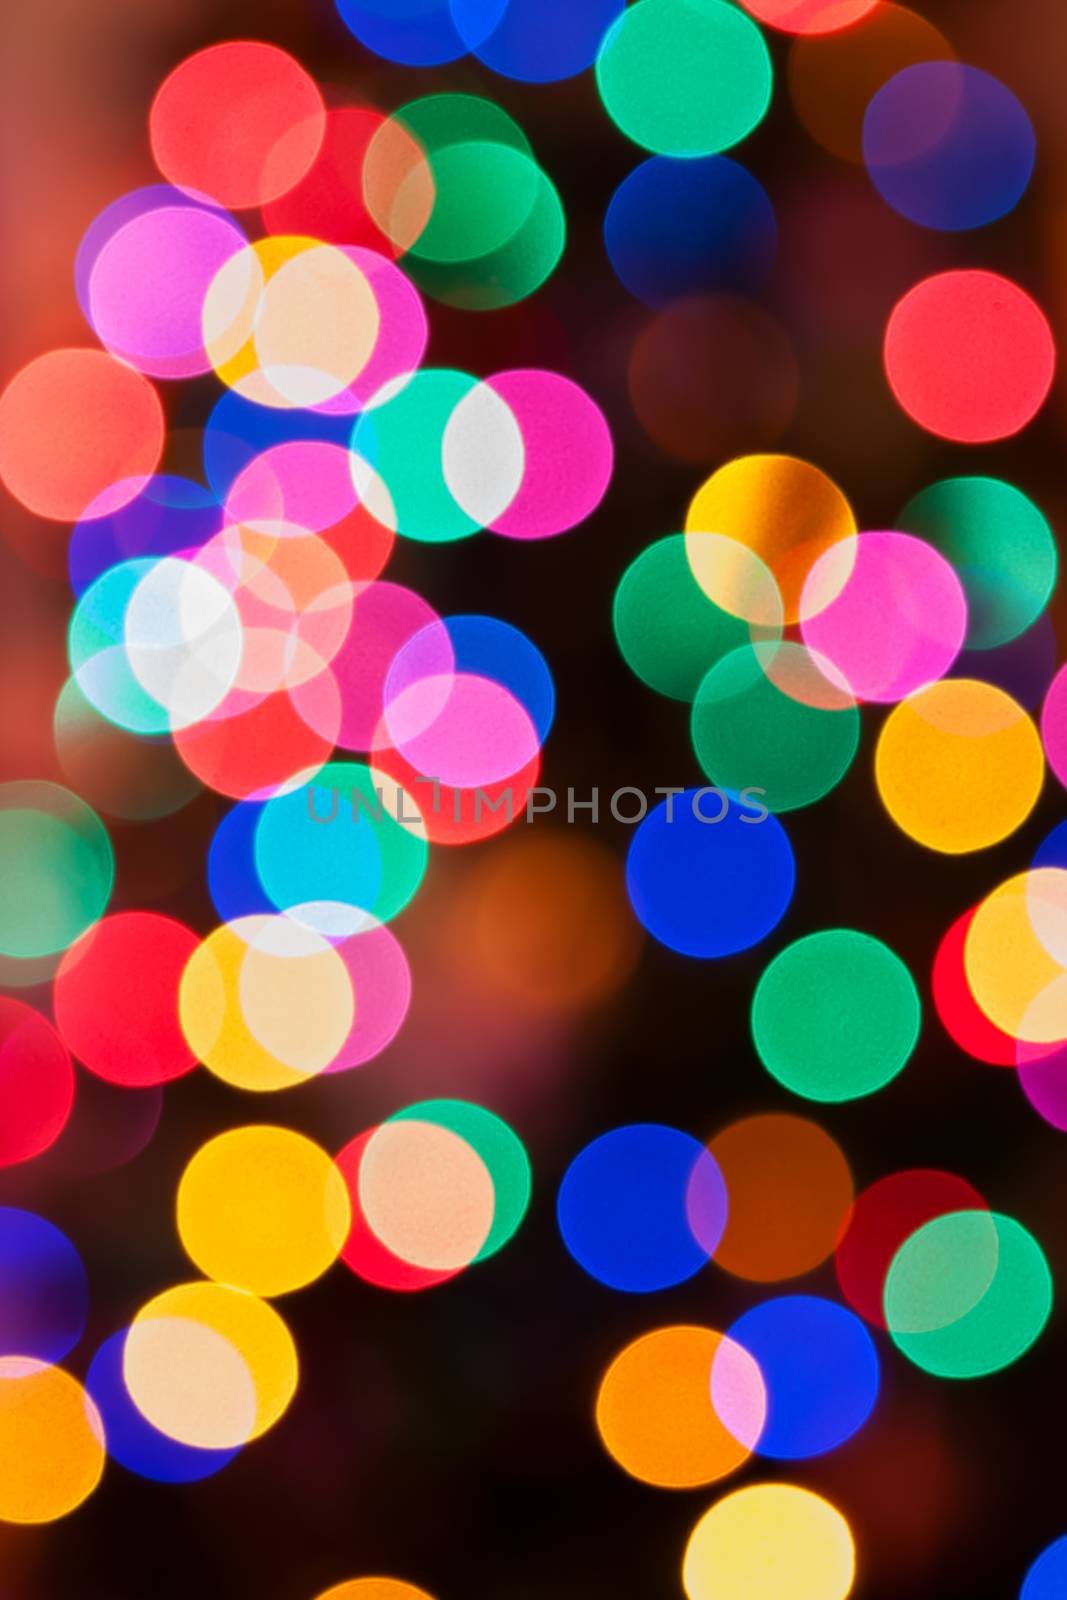 Glowing Christmas lights background by Coffee999